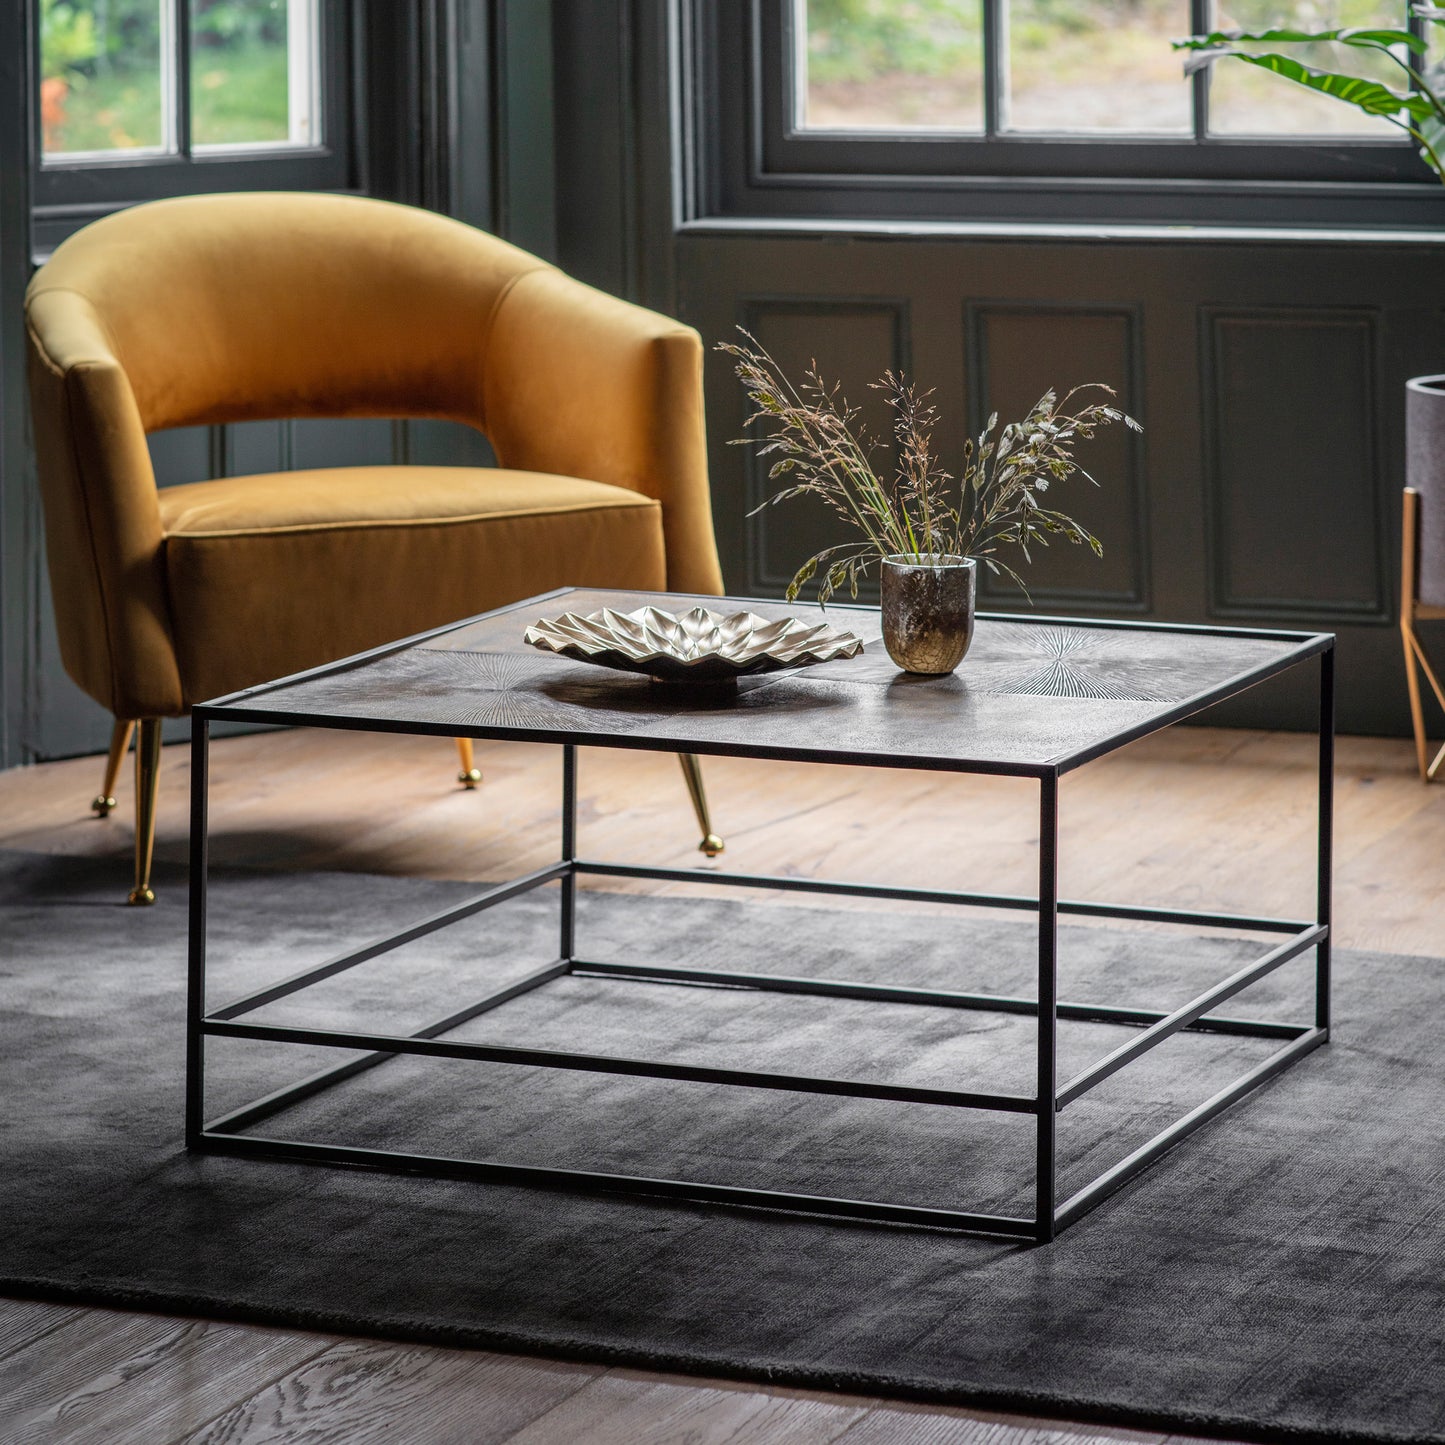 A Home furniture coffee table from Kikiathome.co.uk in a room with a yellow chair.